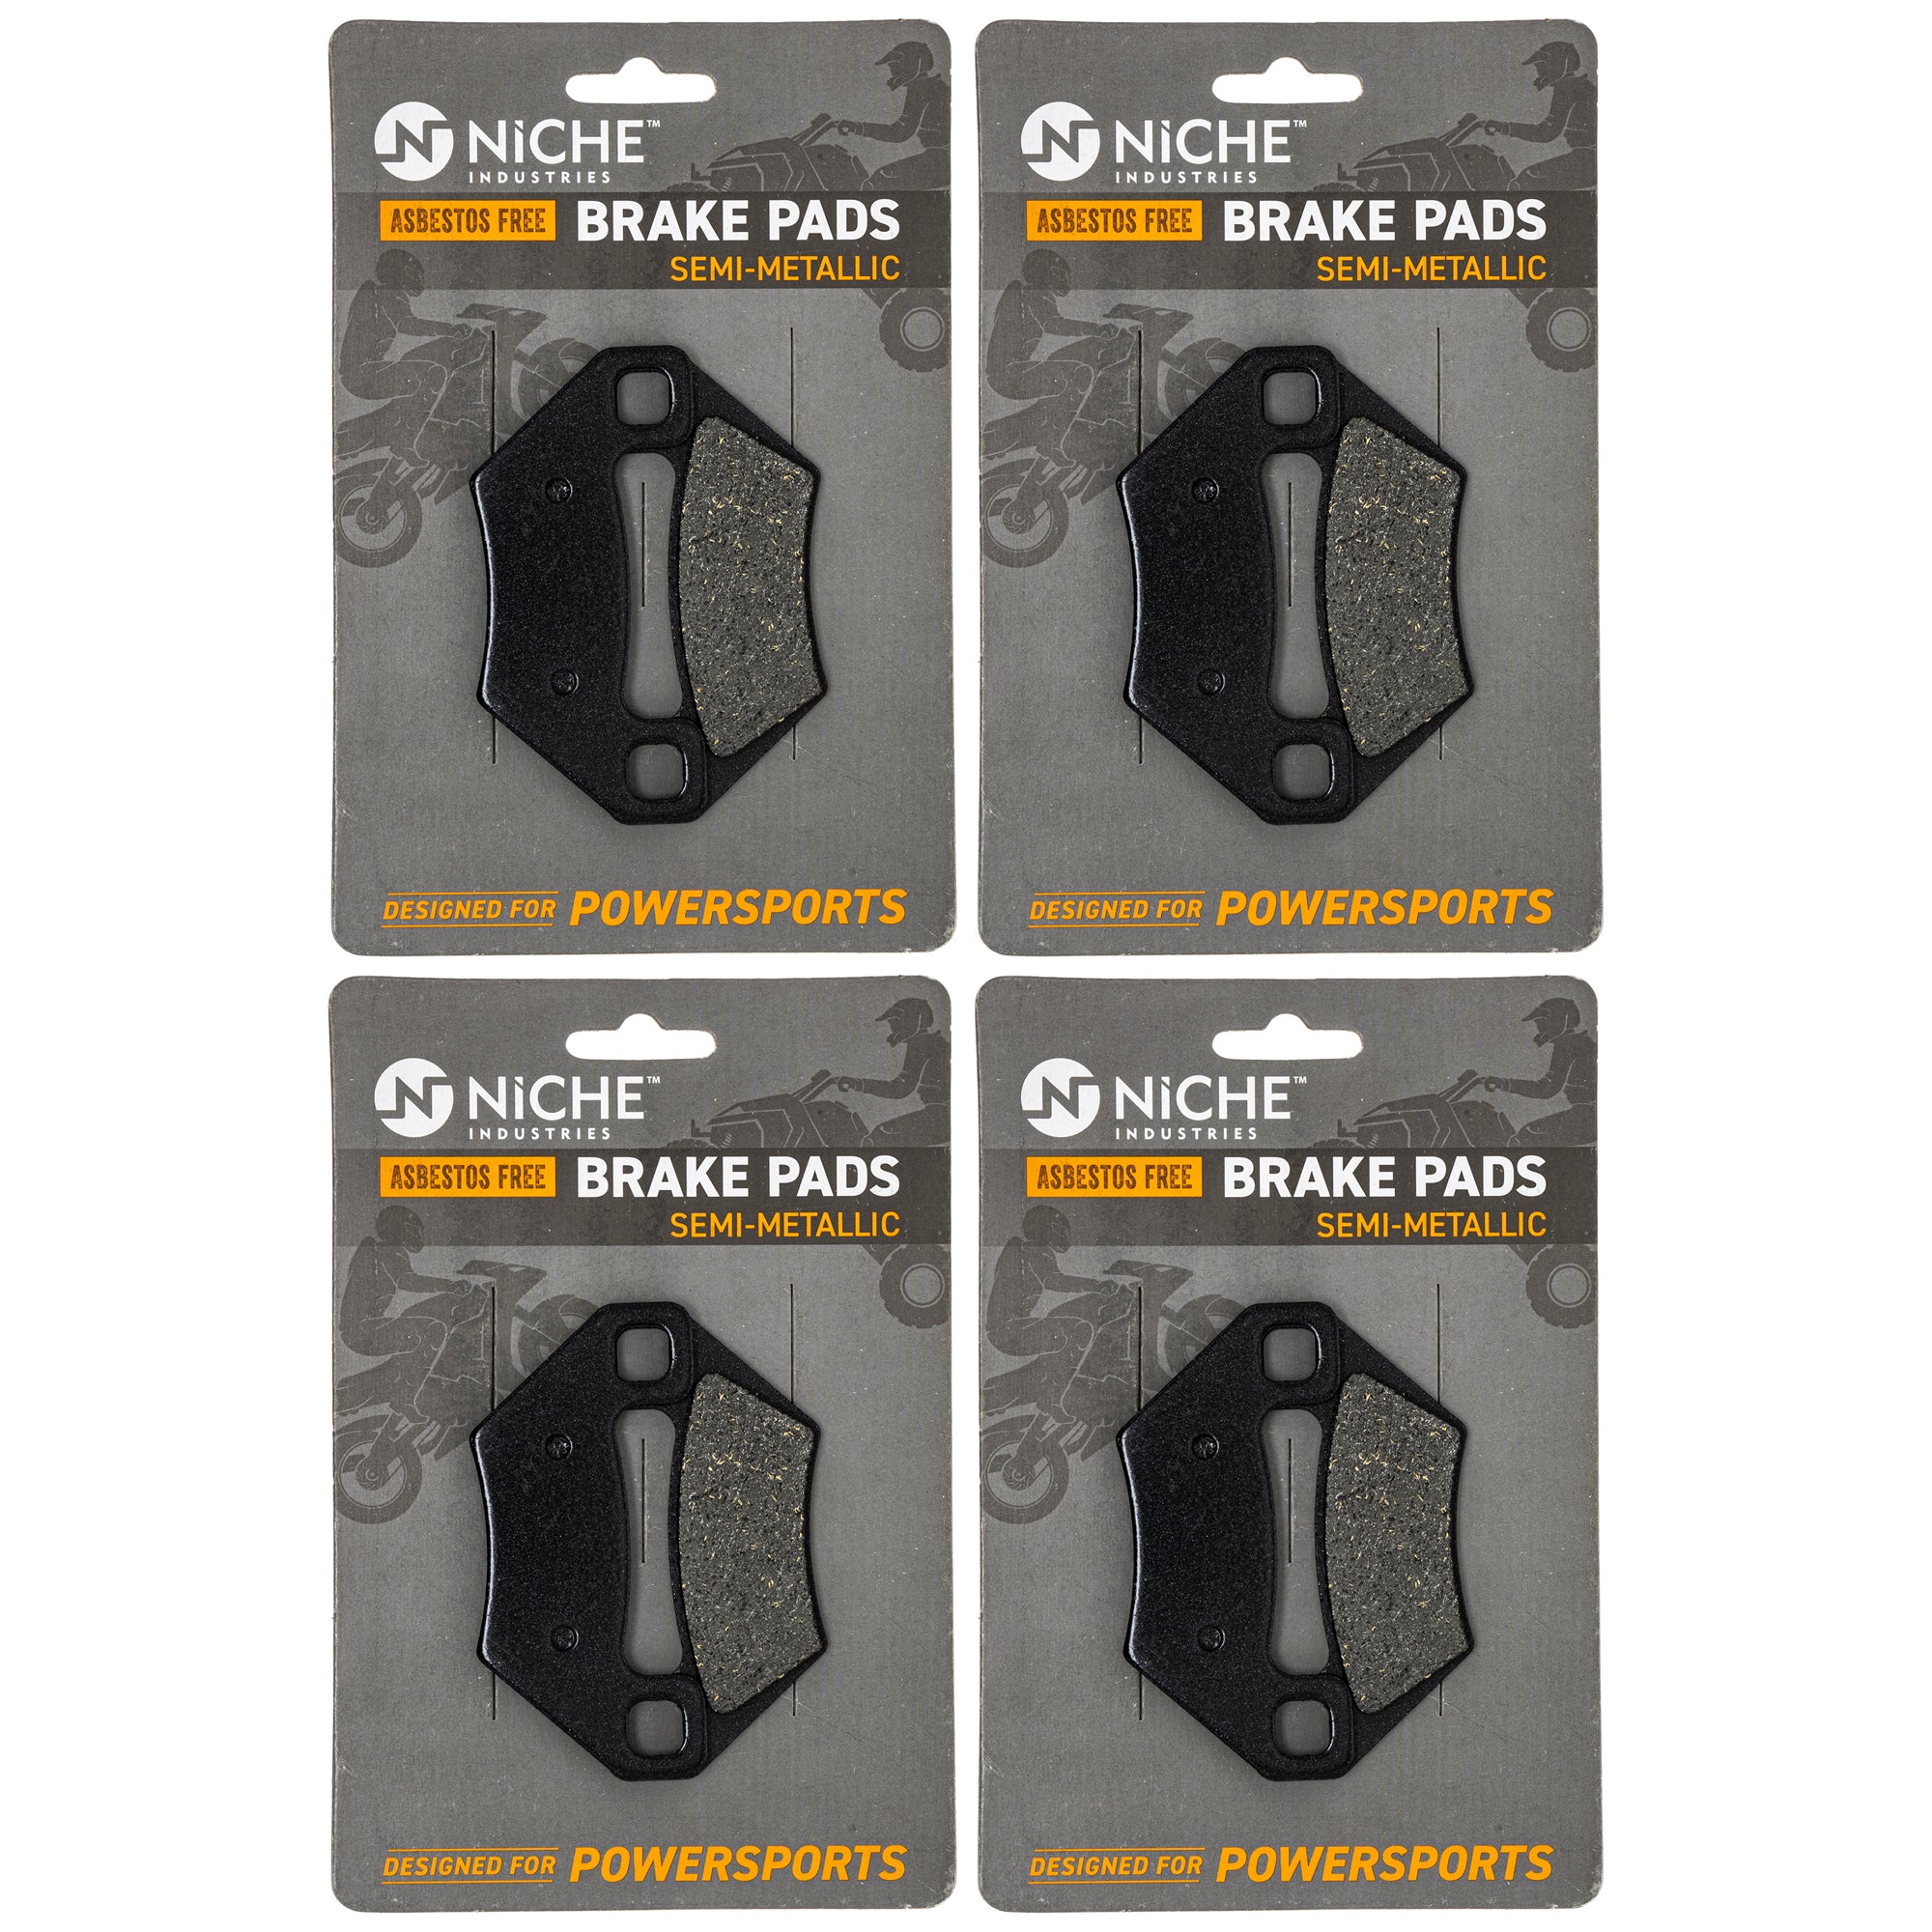 Semi-Metallic Brake Pad Set (Front & Rear) 4-Pack for Arctic Cat Textron Voyager NICHE 519-KPA2254D